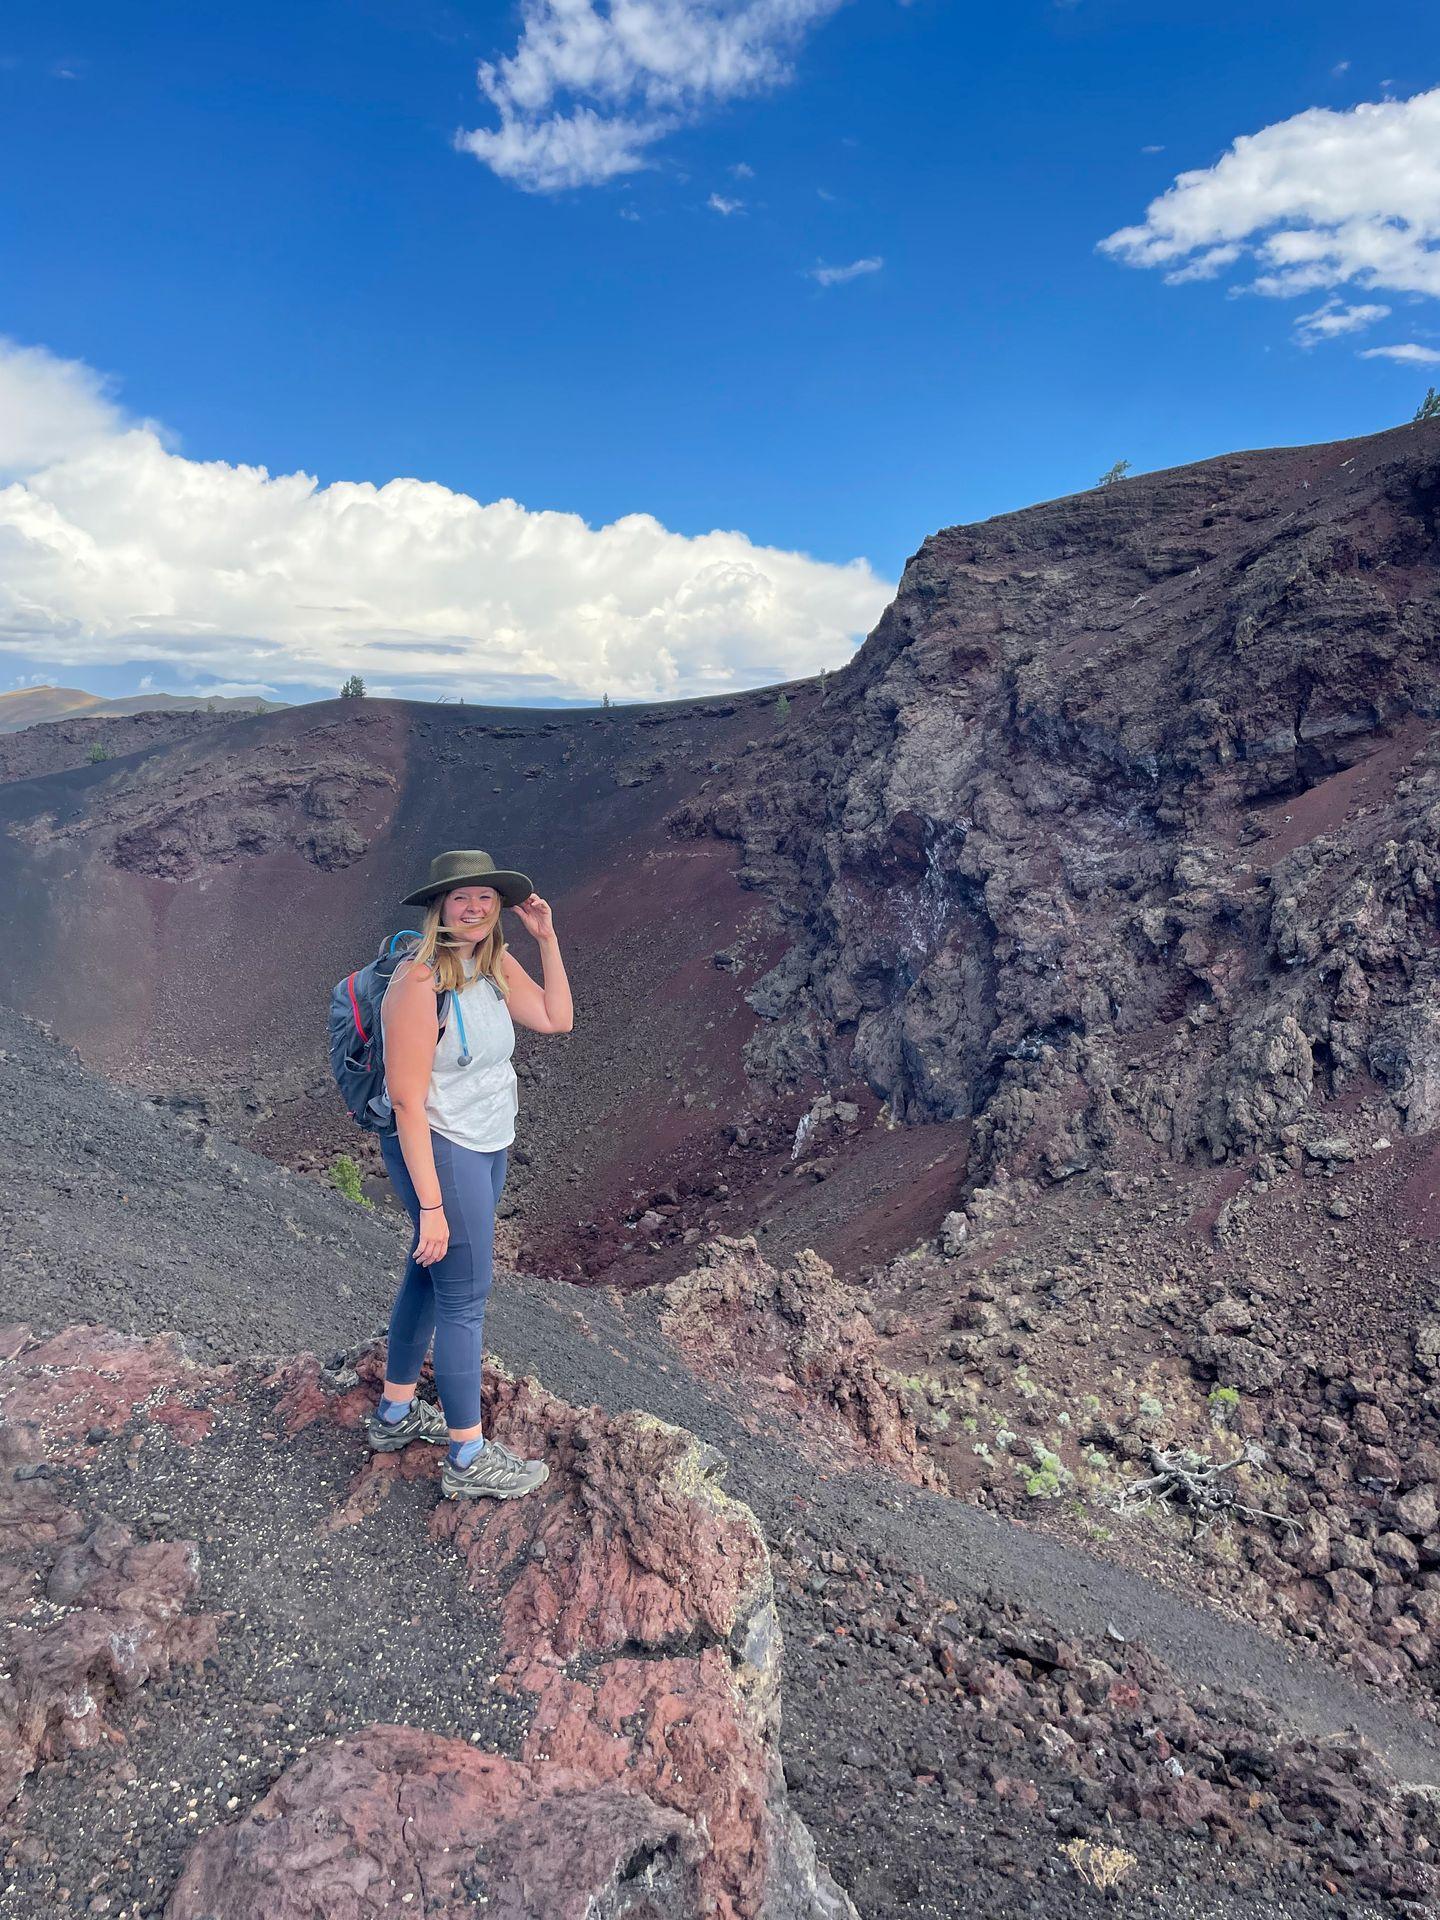 Lydia standing in an area of red and black rocks at Craters of the Moon National Monument.